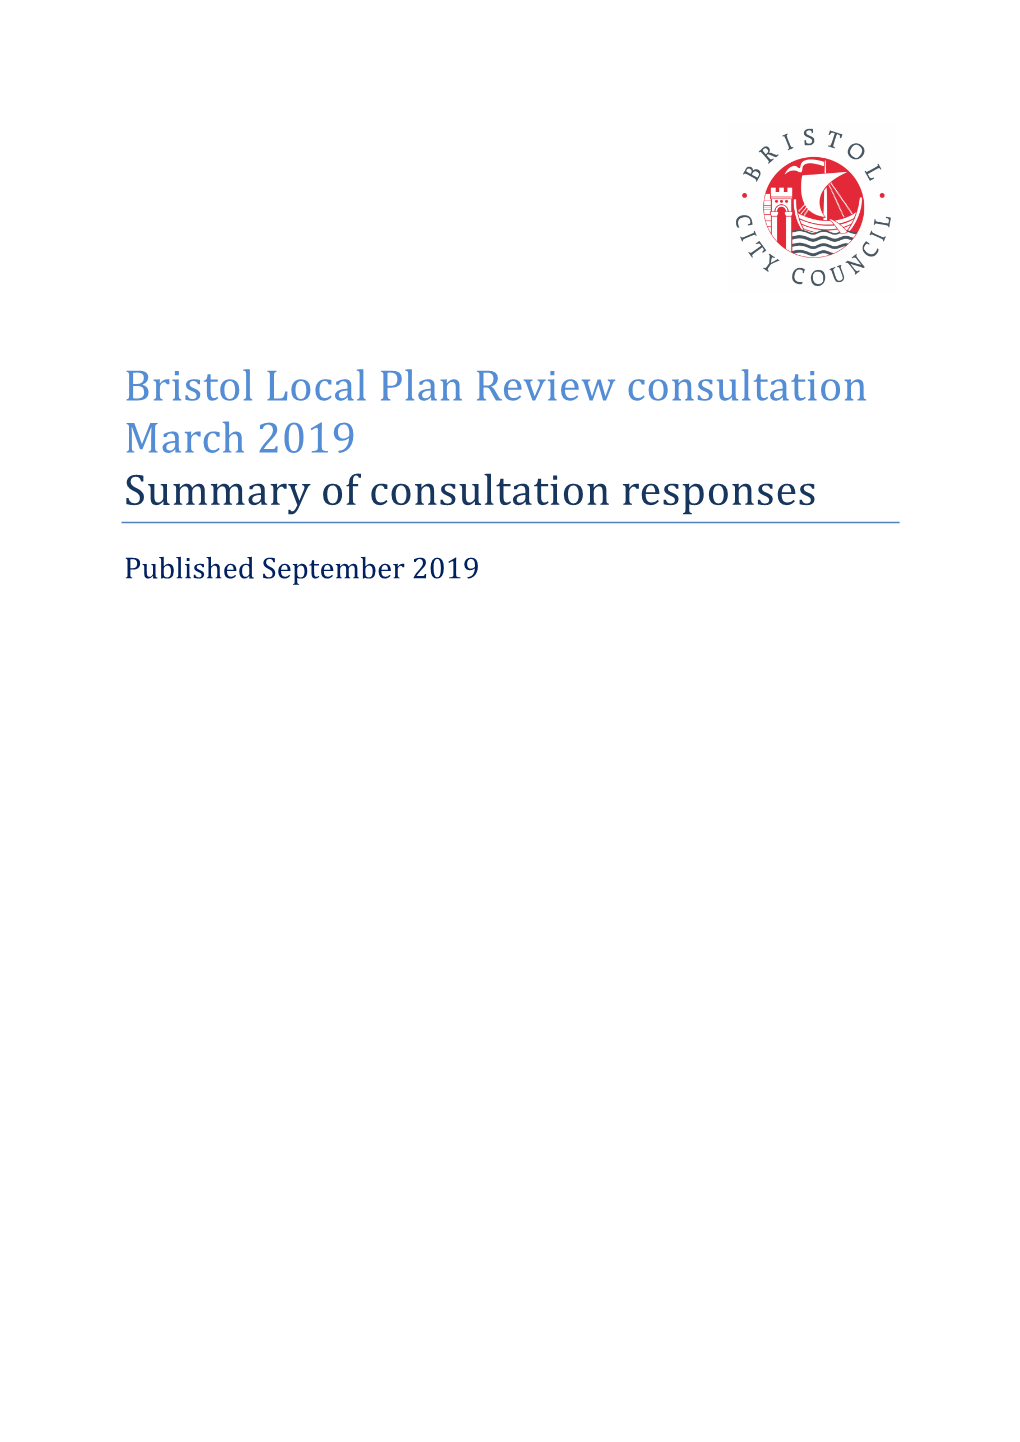 Bristol Local Plan Review Consultation March 2019 Summary of Consultation Responses